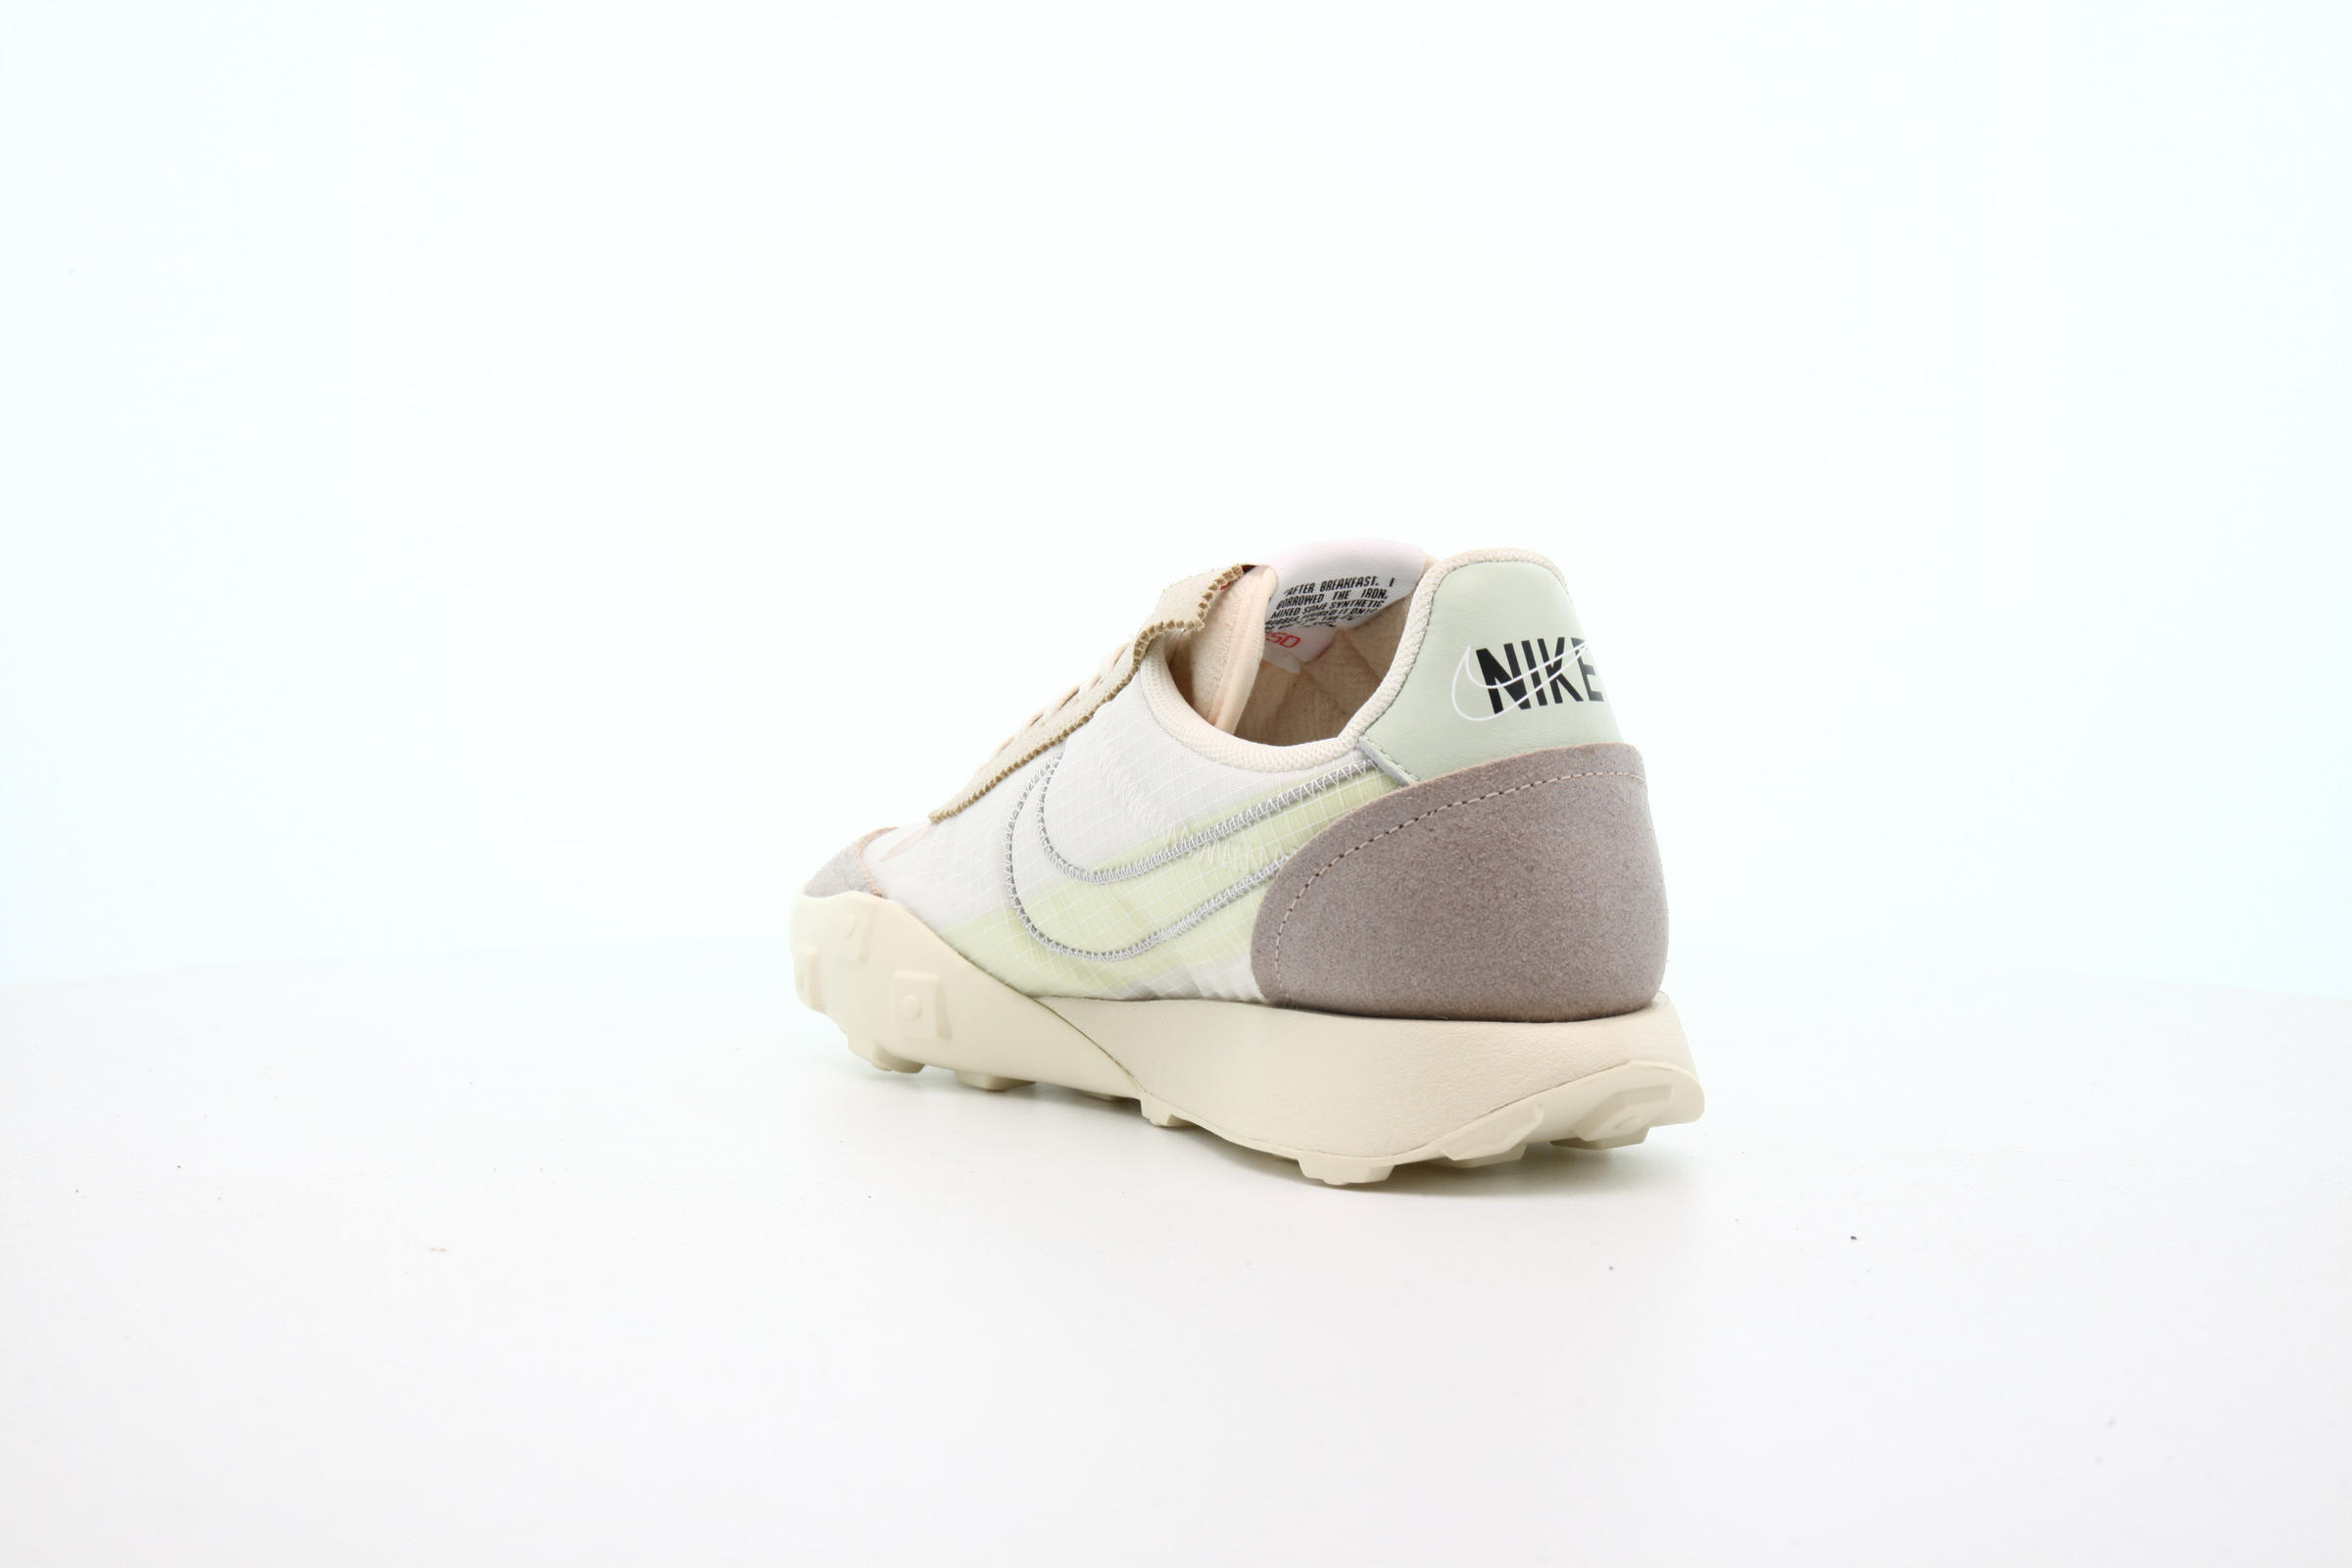 Nike WMNS WAFFLE RACER LX SERIES QS "PALE IVORY"